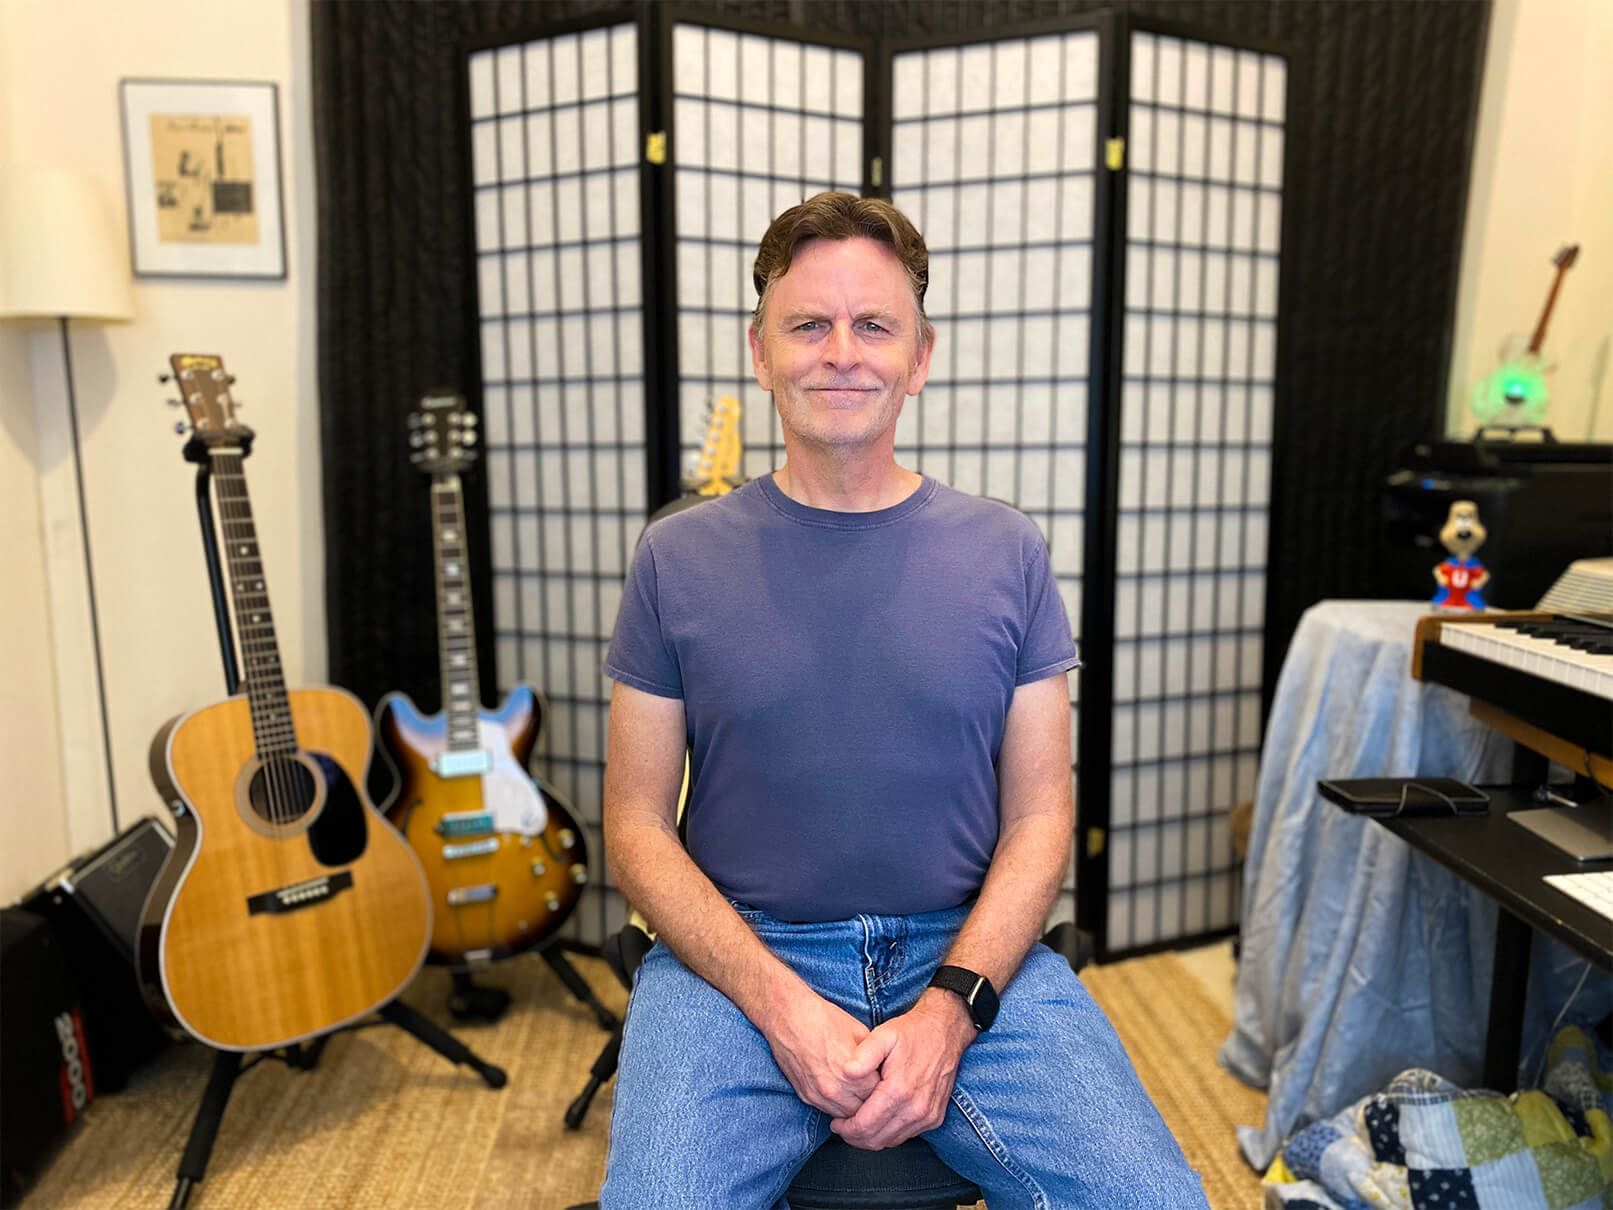 Man sits flanked by guitars in home studio